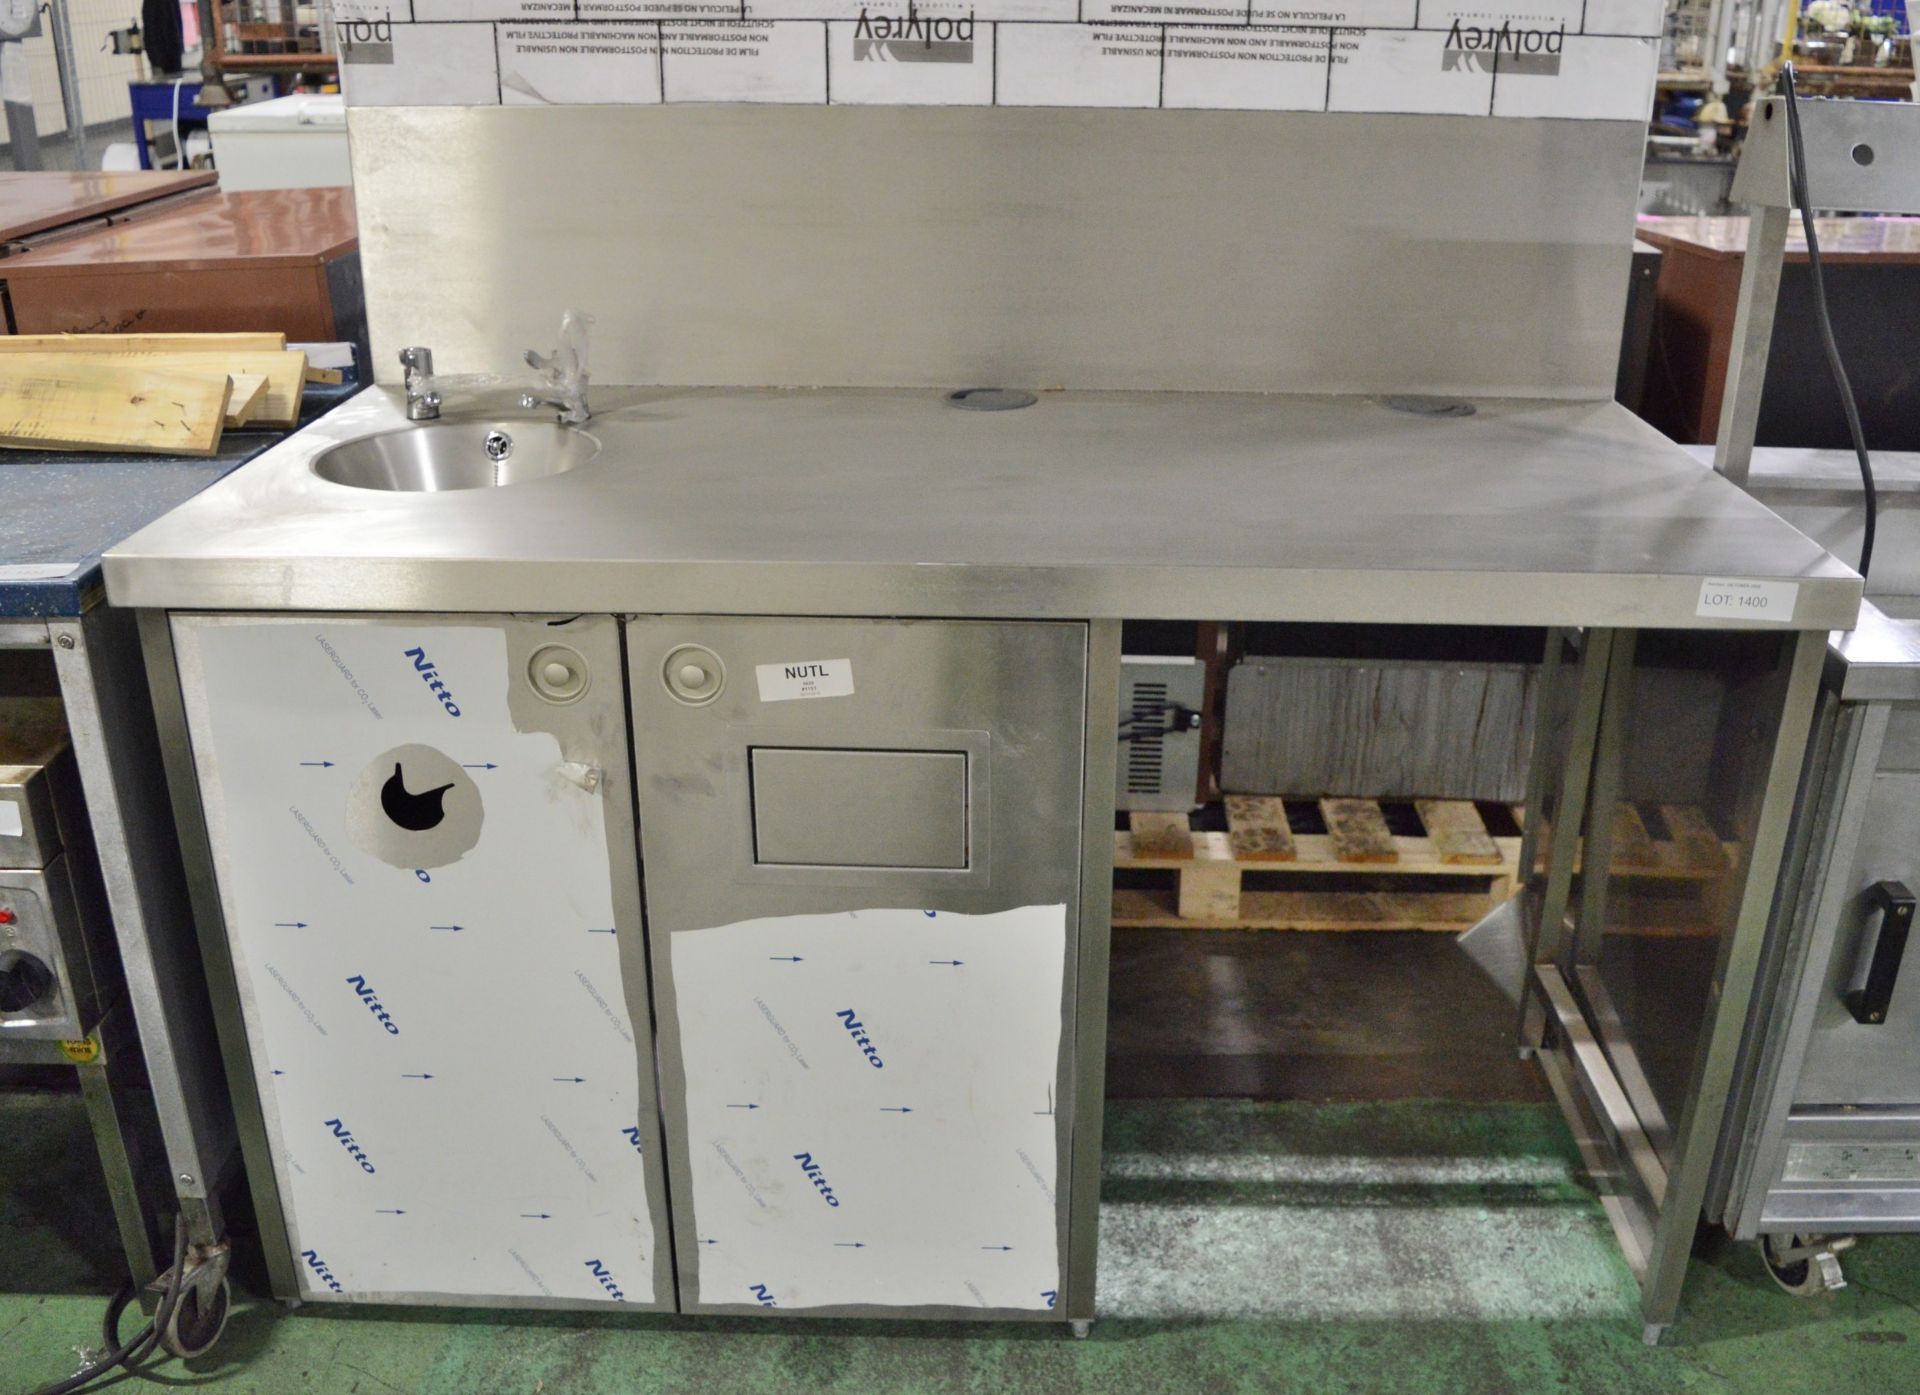 Stainless Steel Kitchen Preparation Unit with Tile Effect Backing & Single Tap Basin - L16 - Image 2 of 4